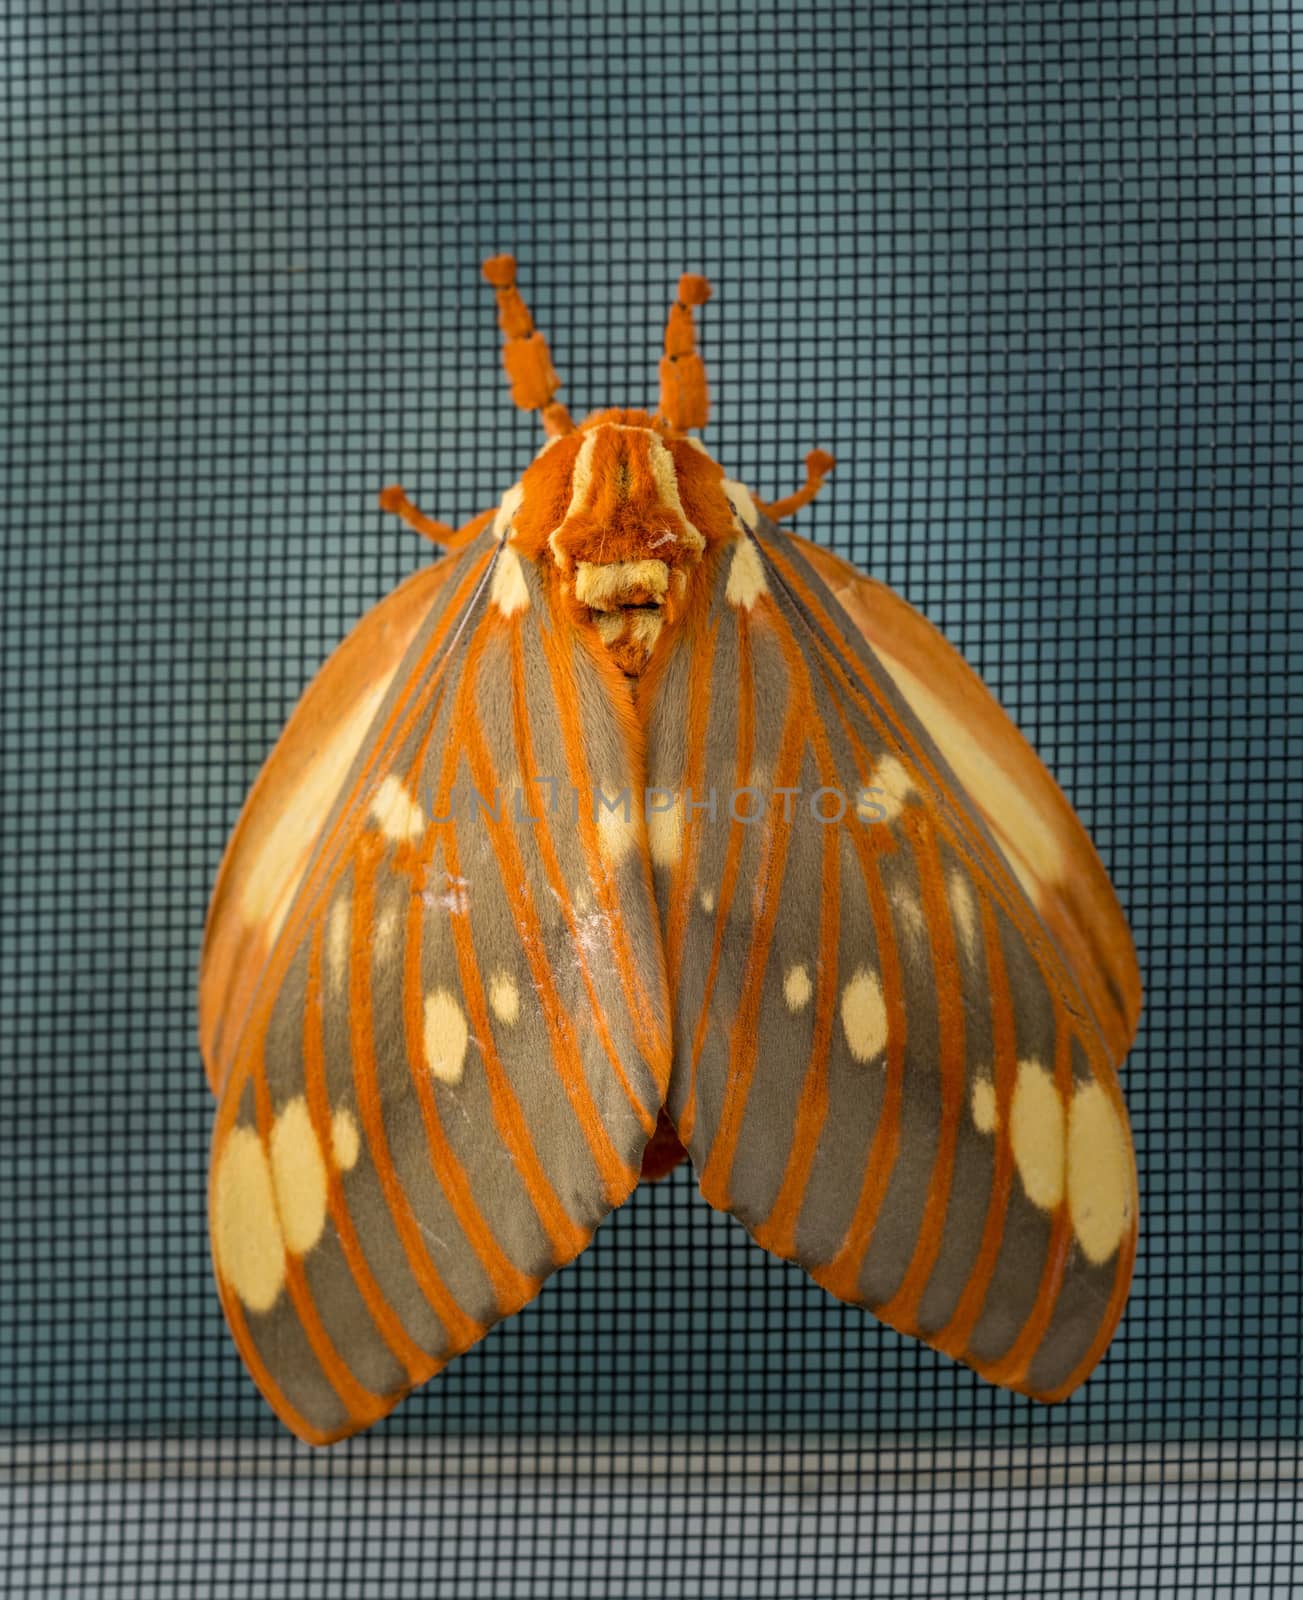 Large Regal Moth or Citheronia Regalis landed on the window screen by steheap